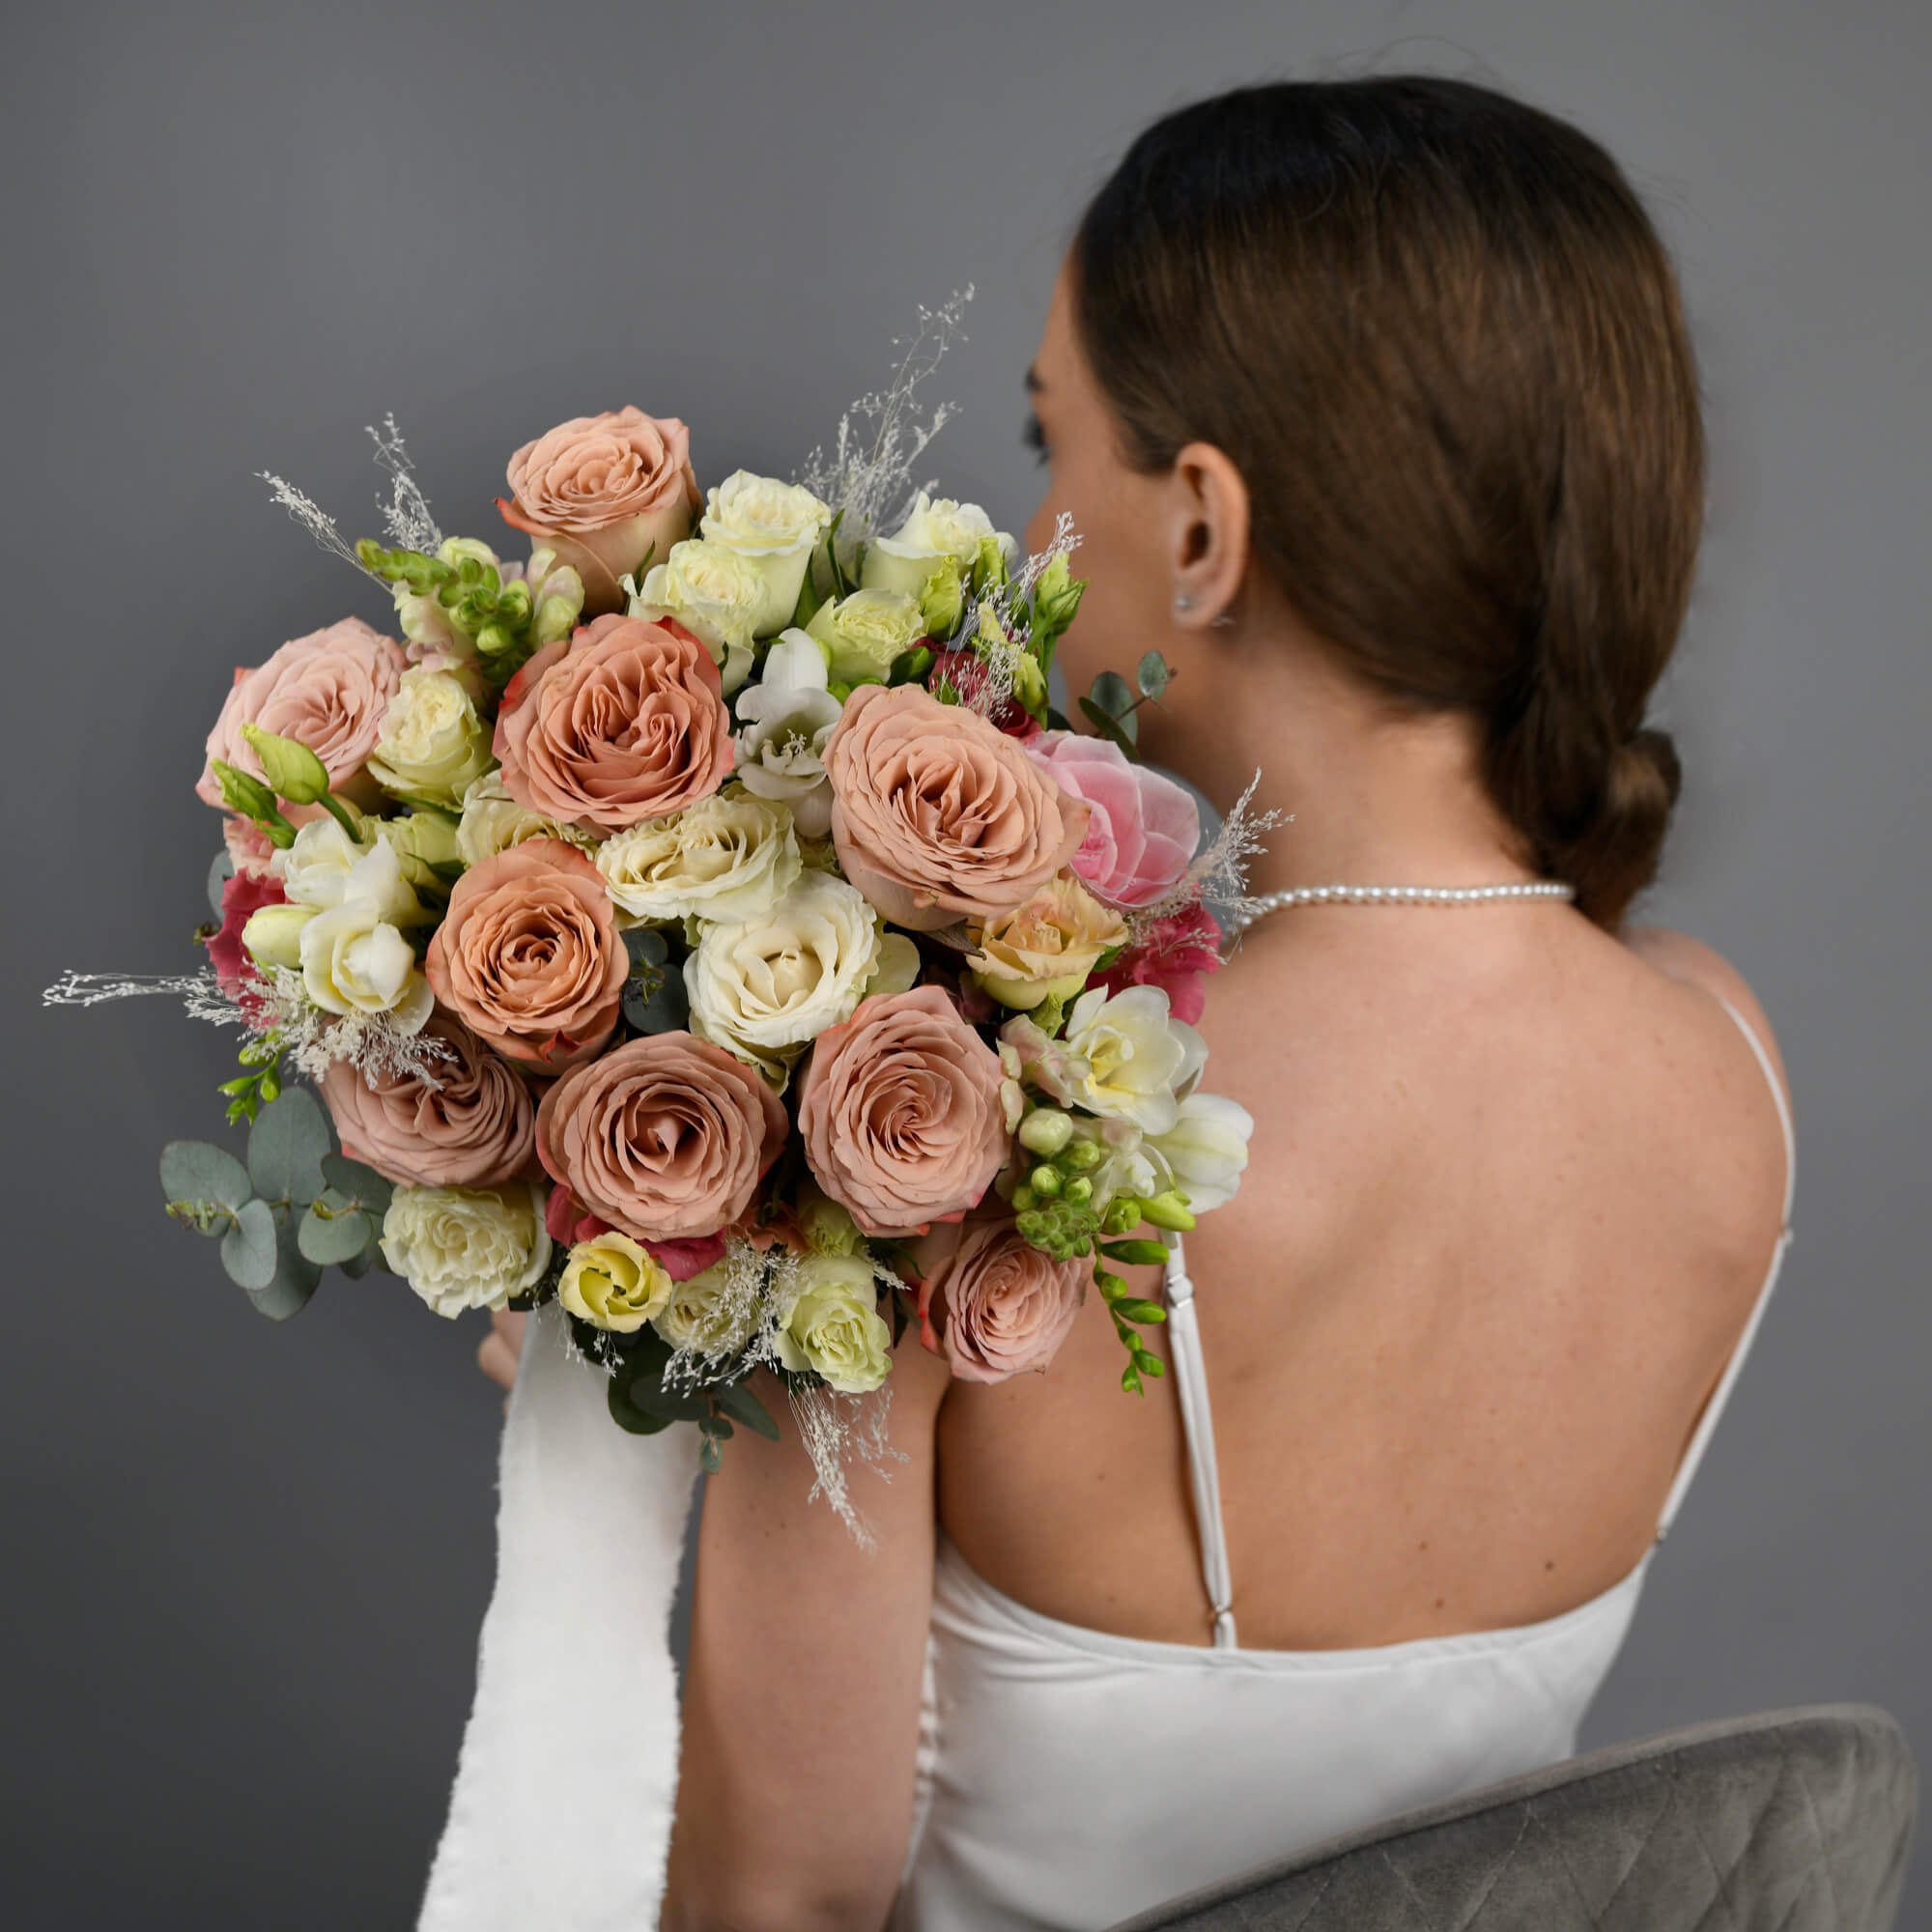 Bridal bouquet with roses and pink antirrhinum